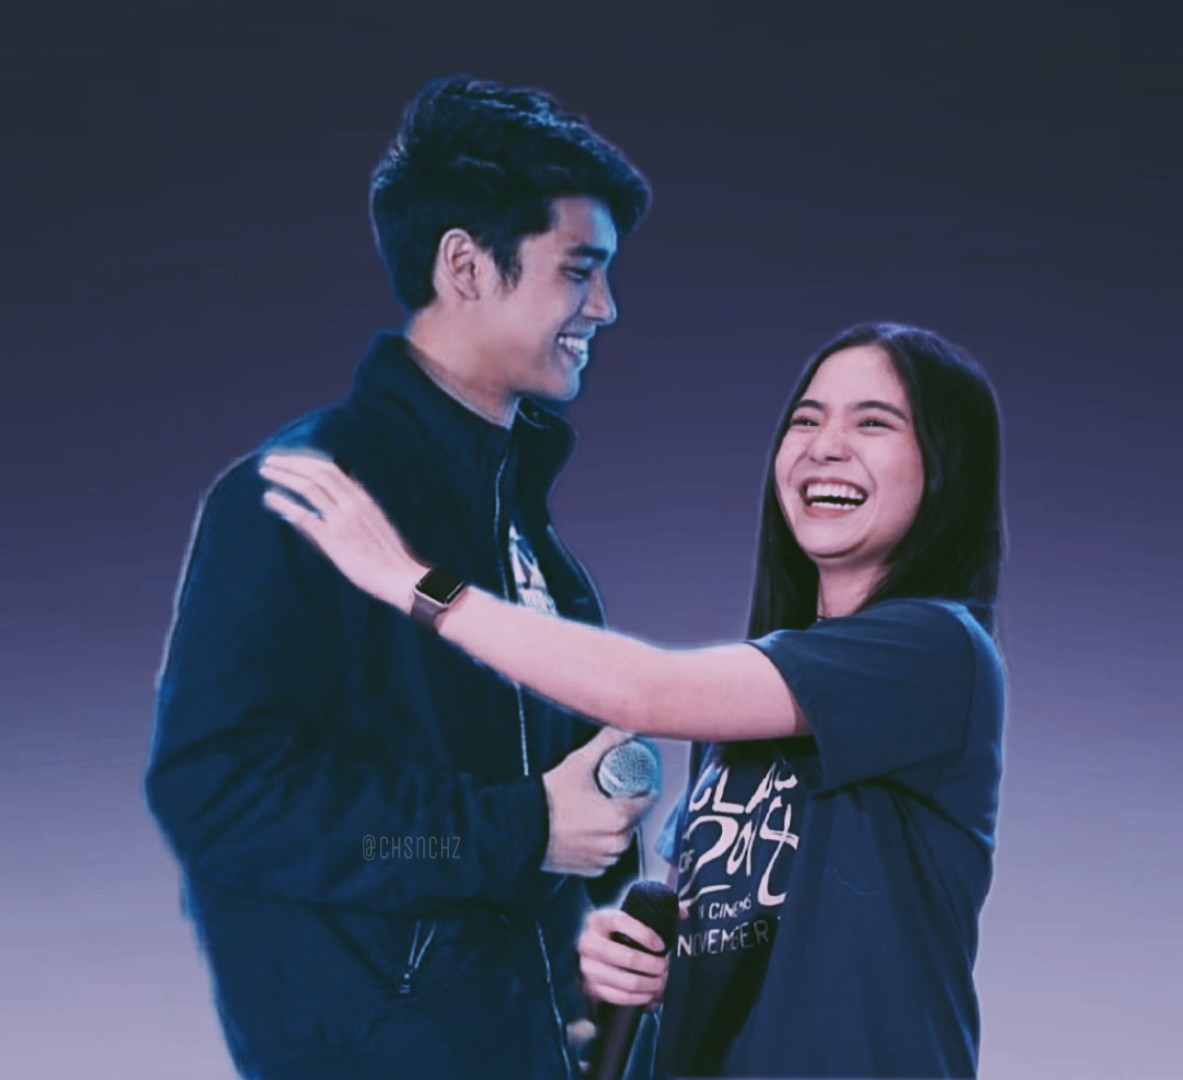 Zoe and Ice for ShardonAng pumoprotekta sa barkada. They don't call theirselves as leaders pero they just do it. We k ow how whipped Ice is kay Zoe. And i think SharDon is the best portrayer for Zoe and Ice